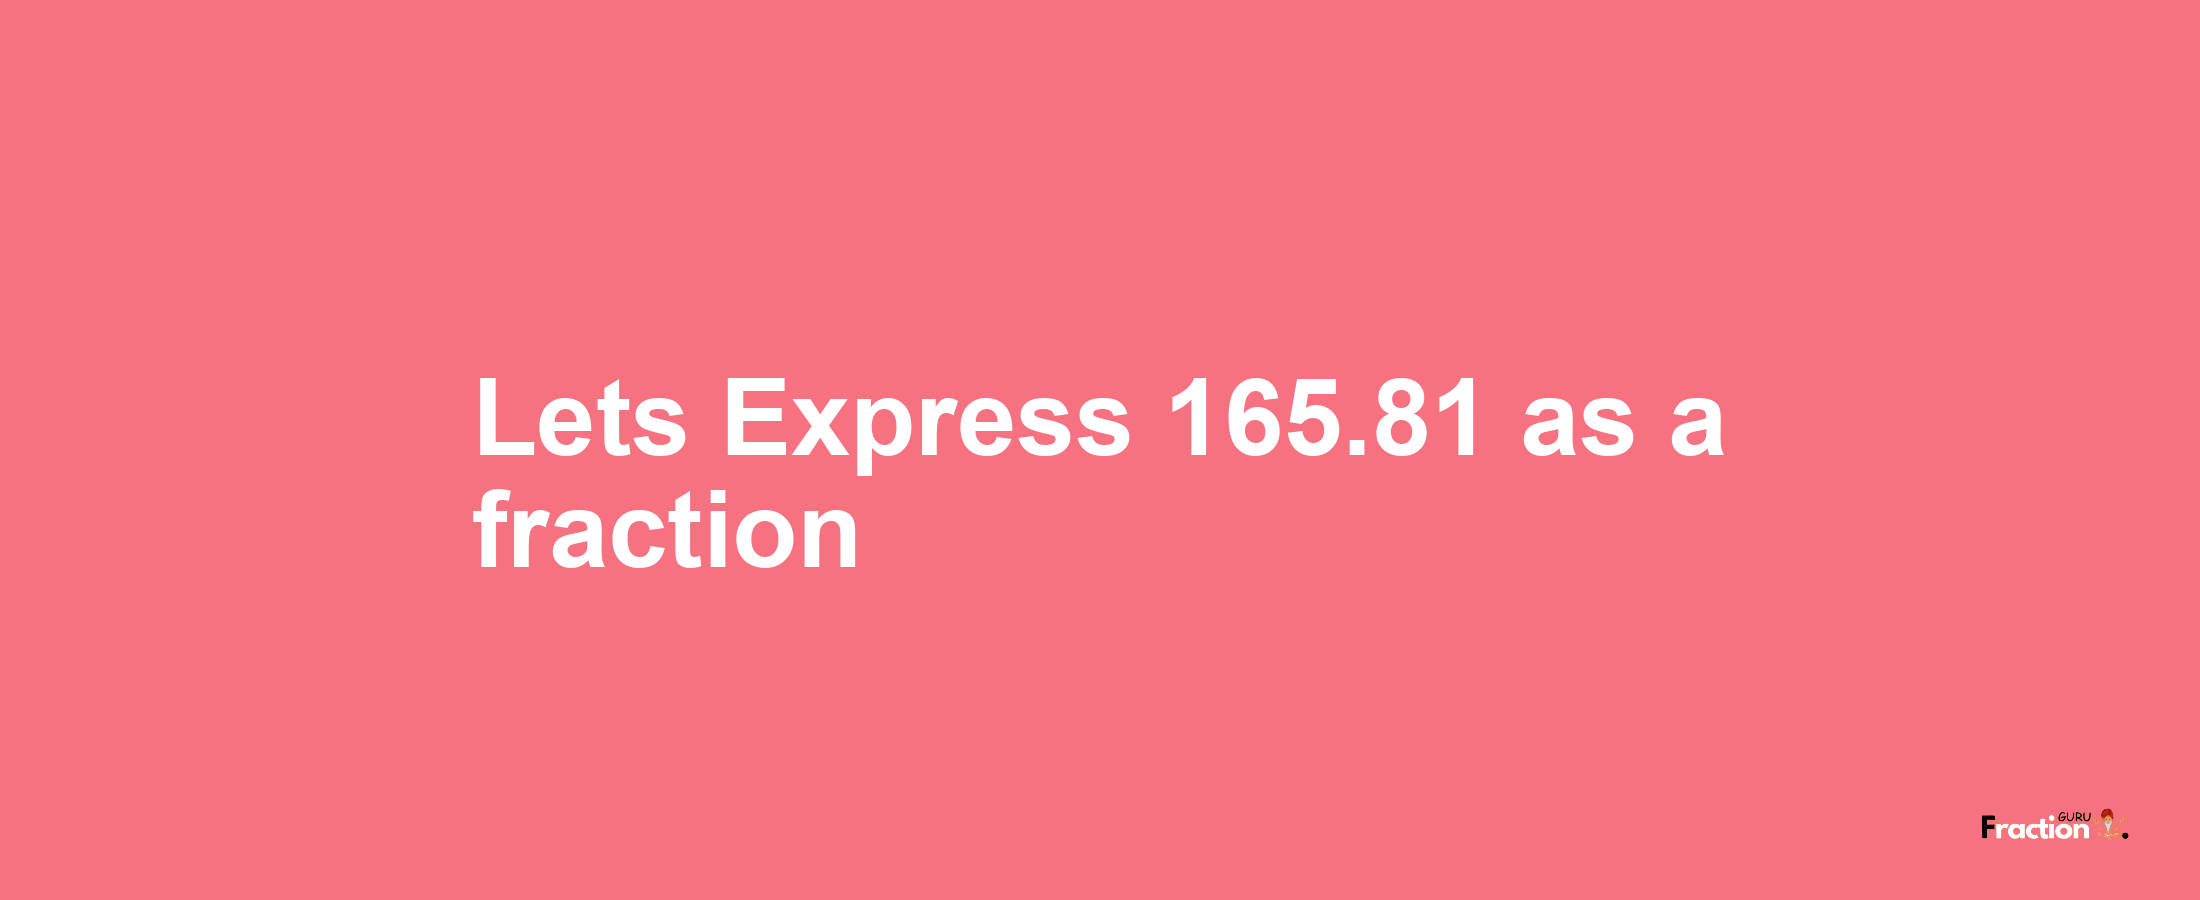 Lets Express 165.81 as afraction